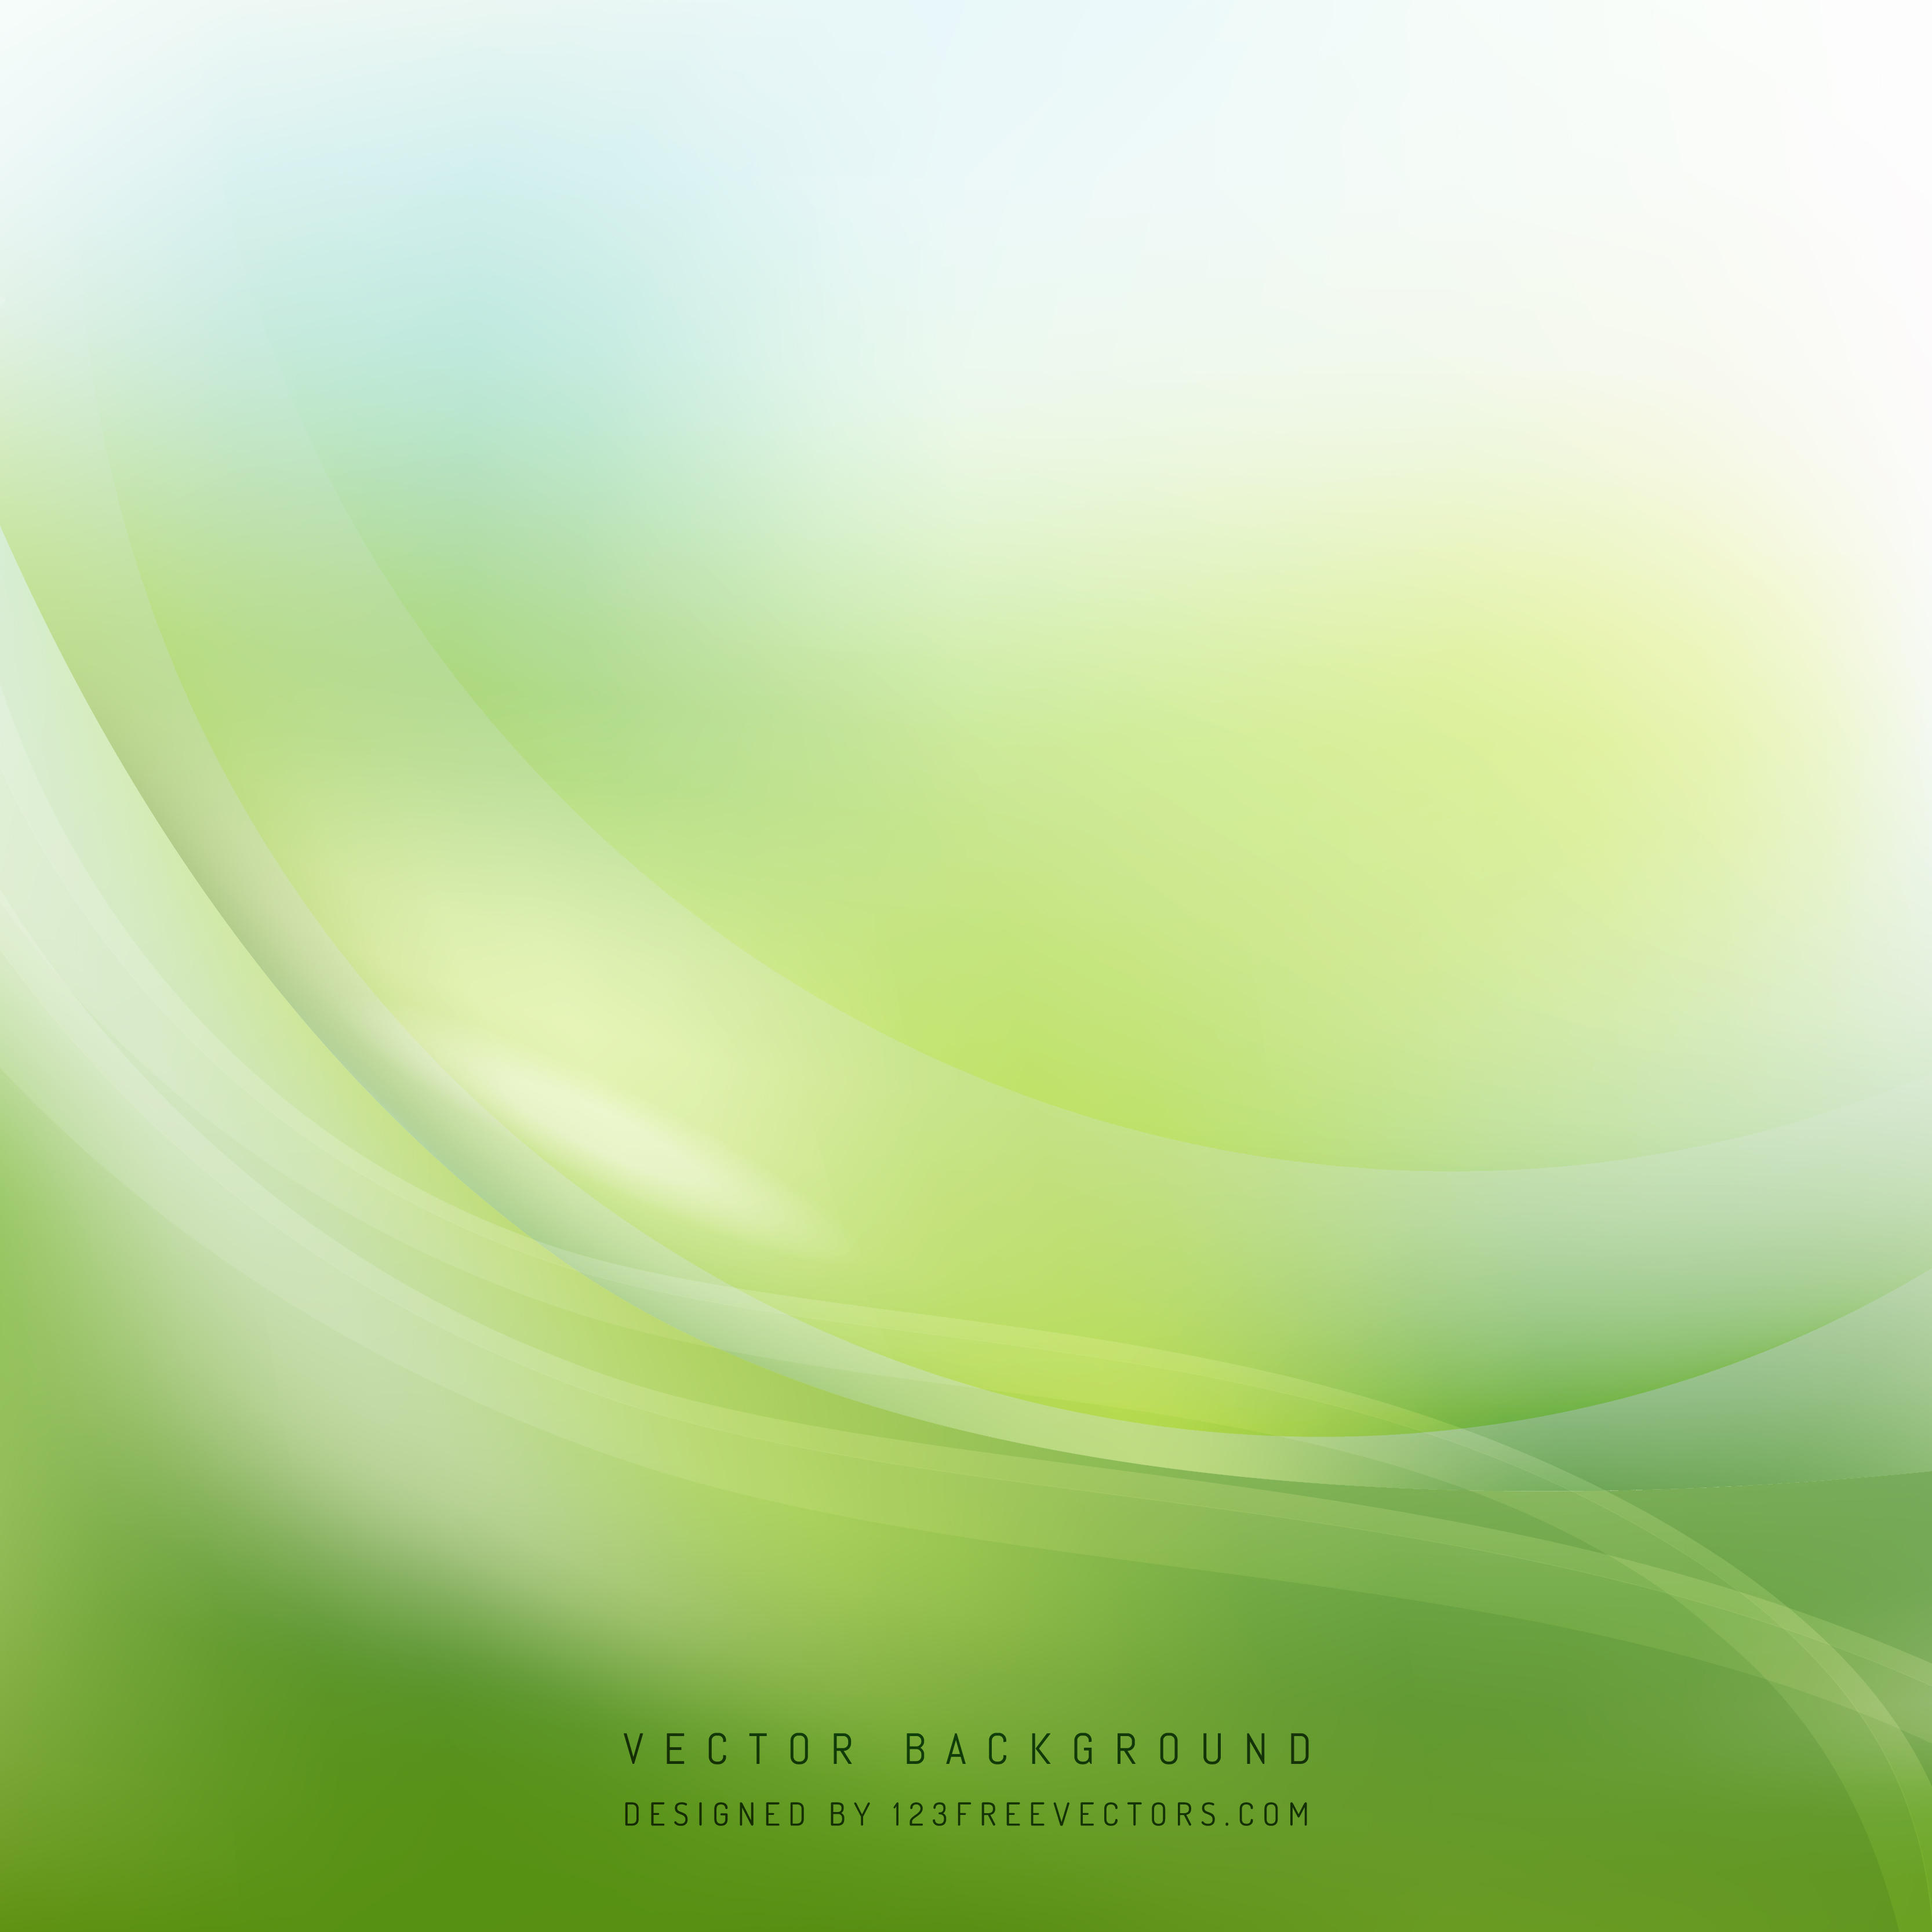 Abstract Light Green Wave Background Template | 123Freevectors